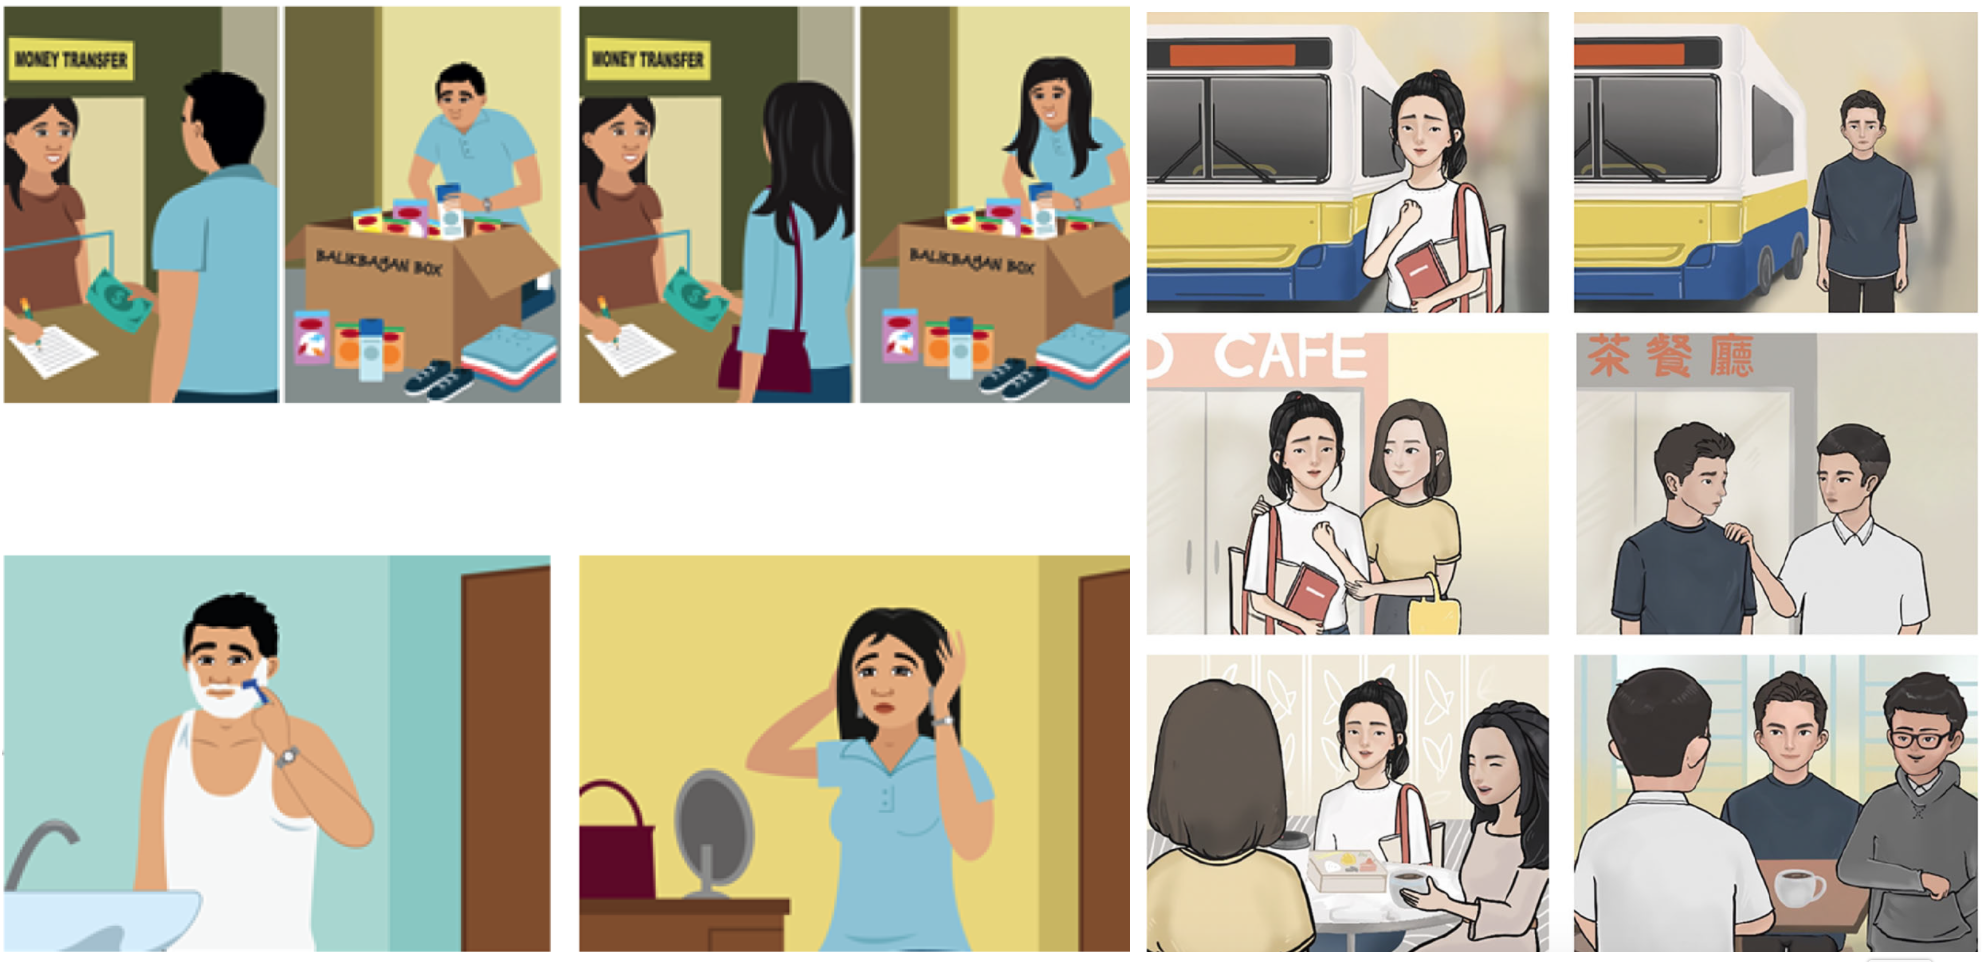 Hall and fellow researchers worked closely with focus groups, mental health care providers, illustrators, writers, and software developers to create adaptations of digital mental health intervention Step-by-Step for Filipino migrant workers (left) and Chinese young adults (right)